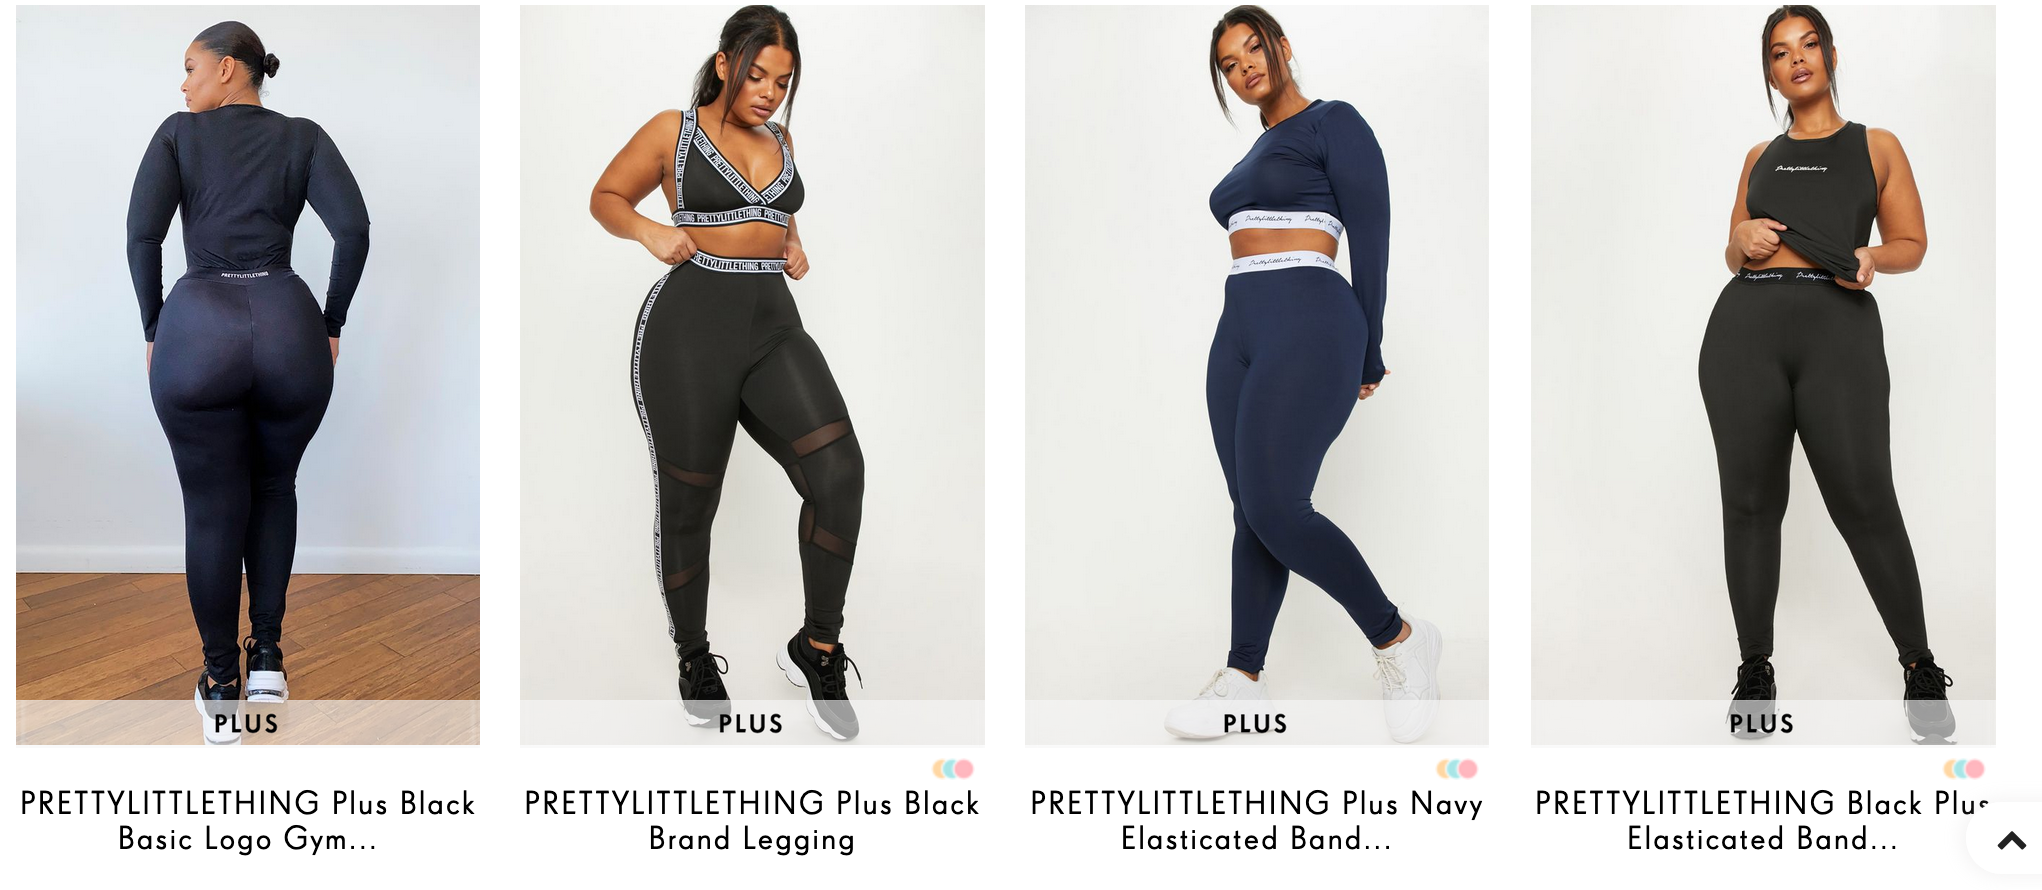 Let’s Move – Styles of a Curvy Girl